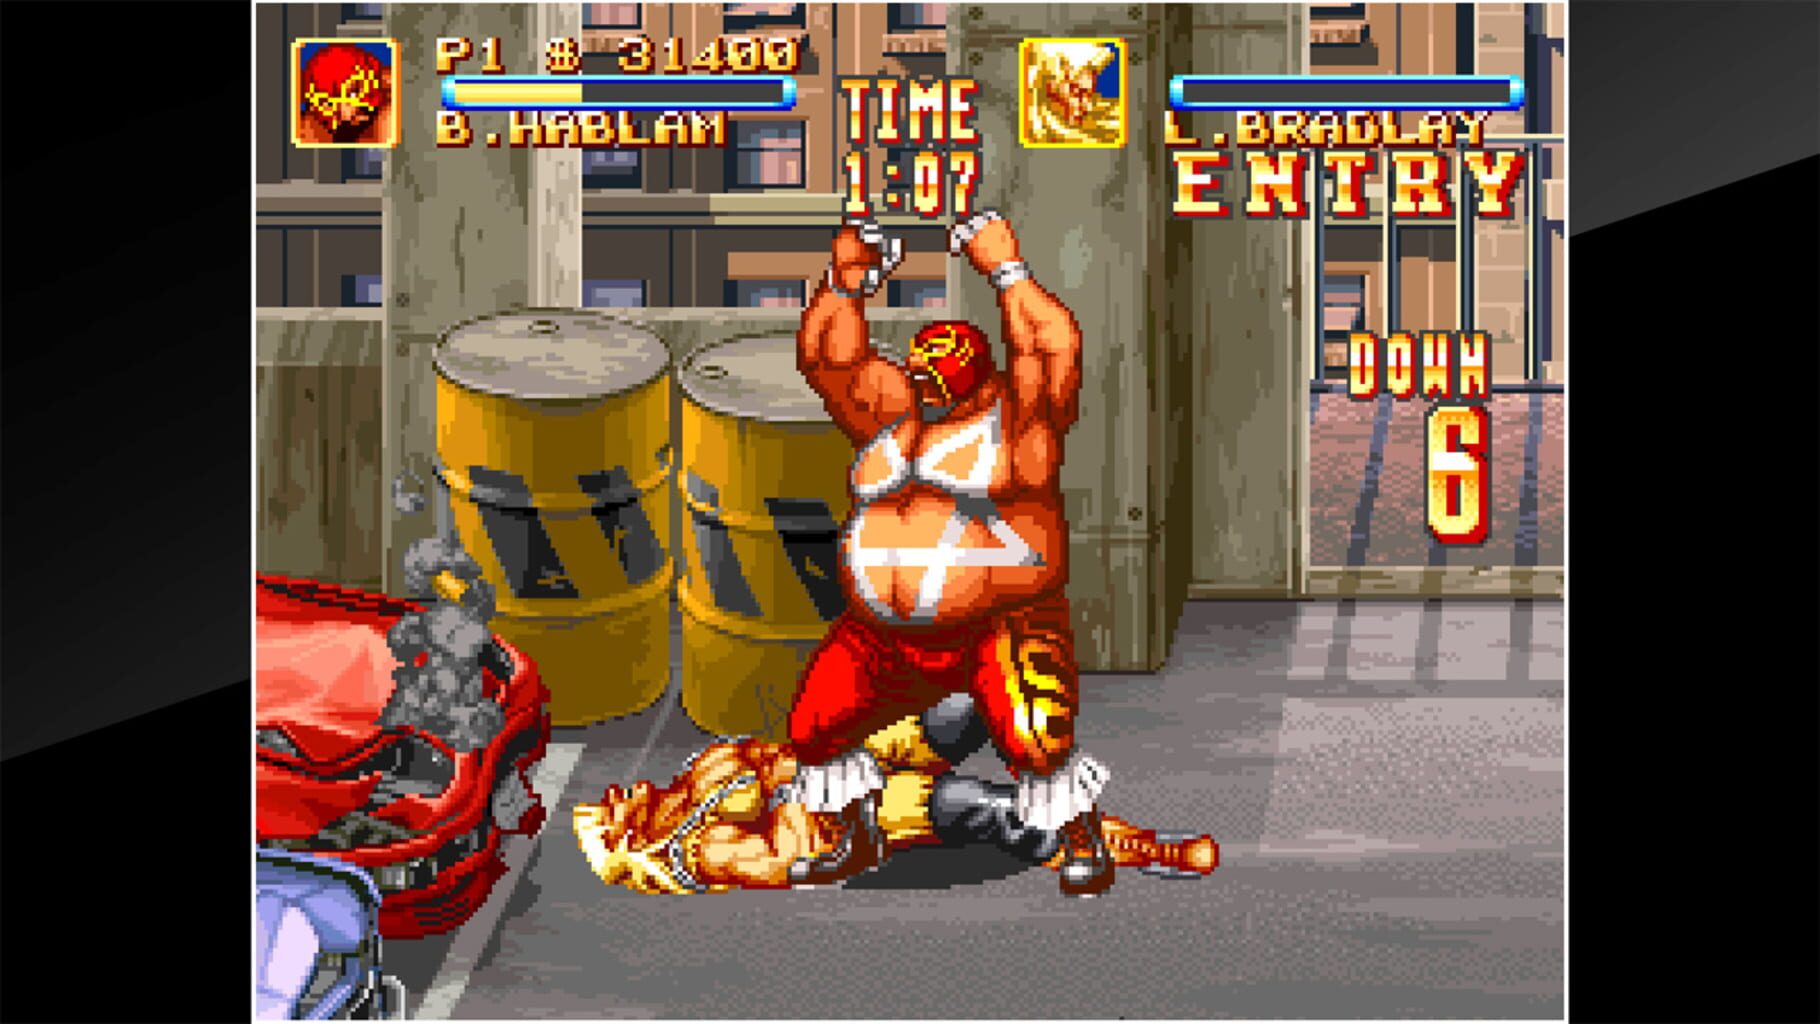 ACA Neo Geo: 3 Count Bout Image